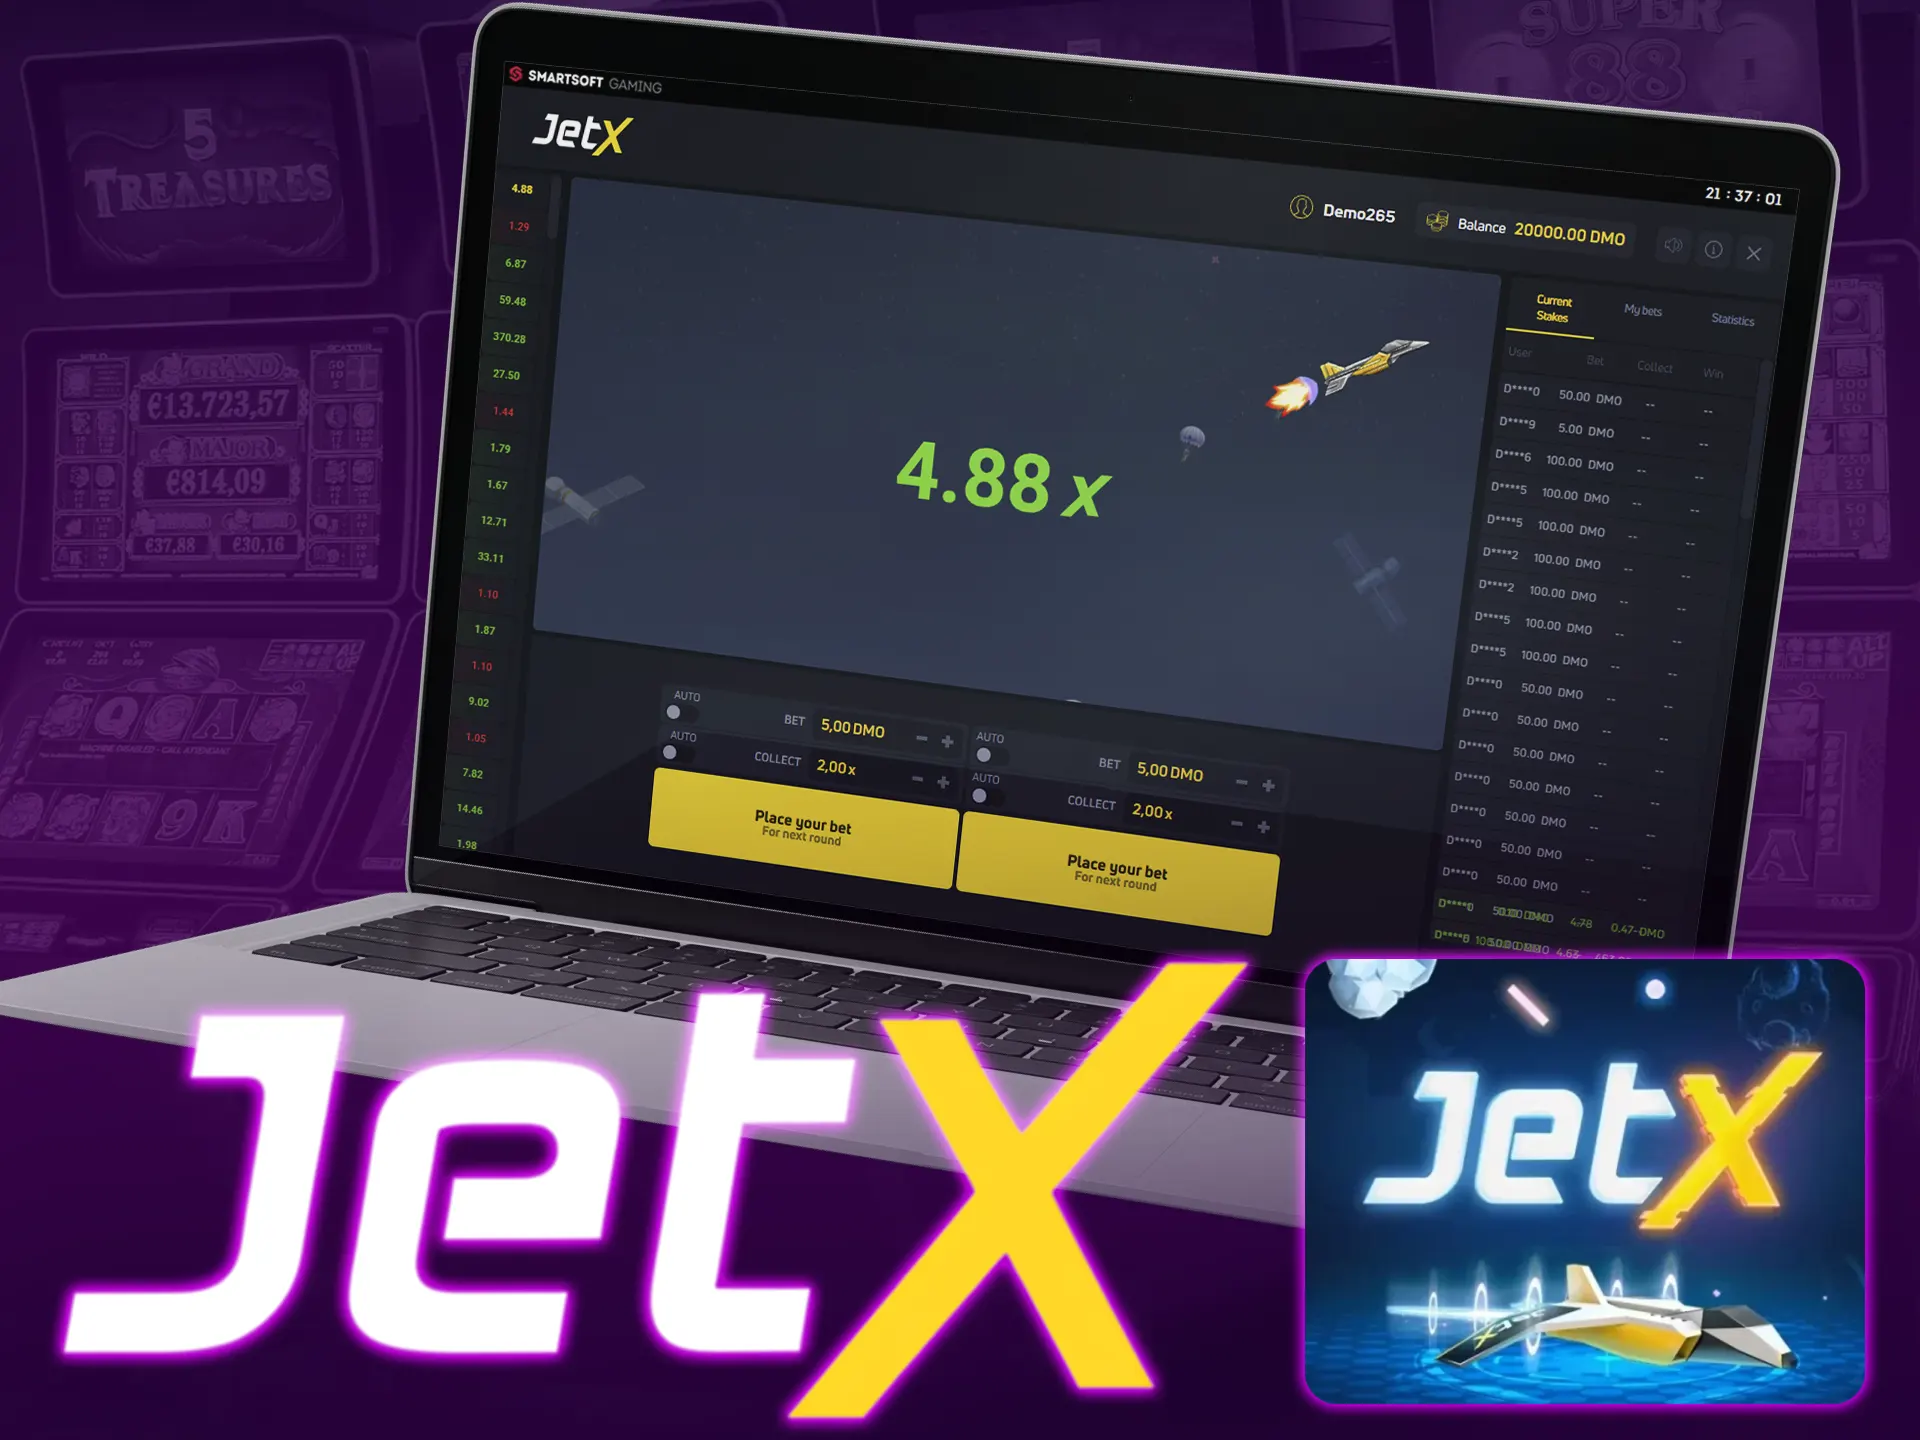 Jet X offers thrilling aviation-themed gaming with flexible betting.